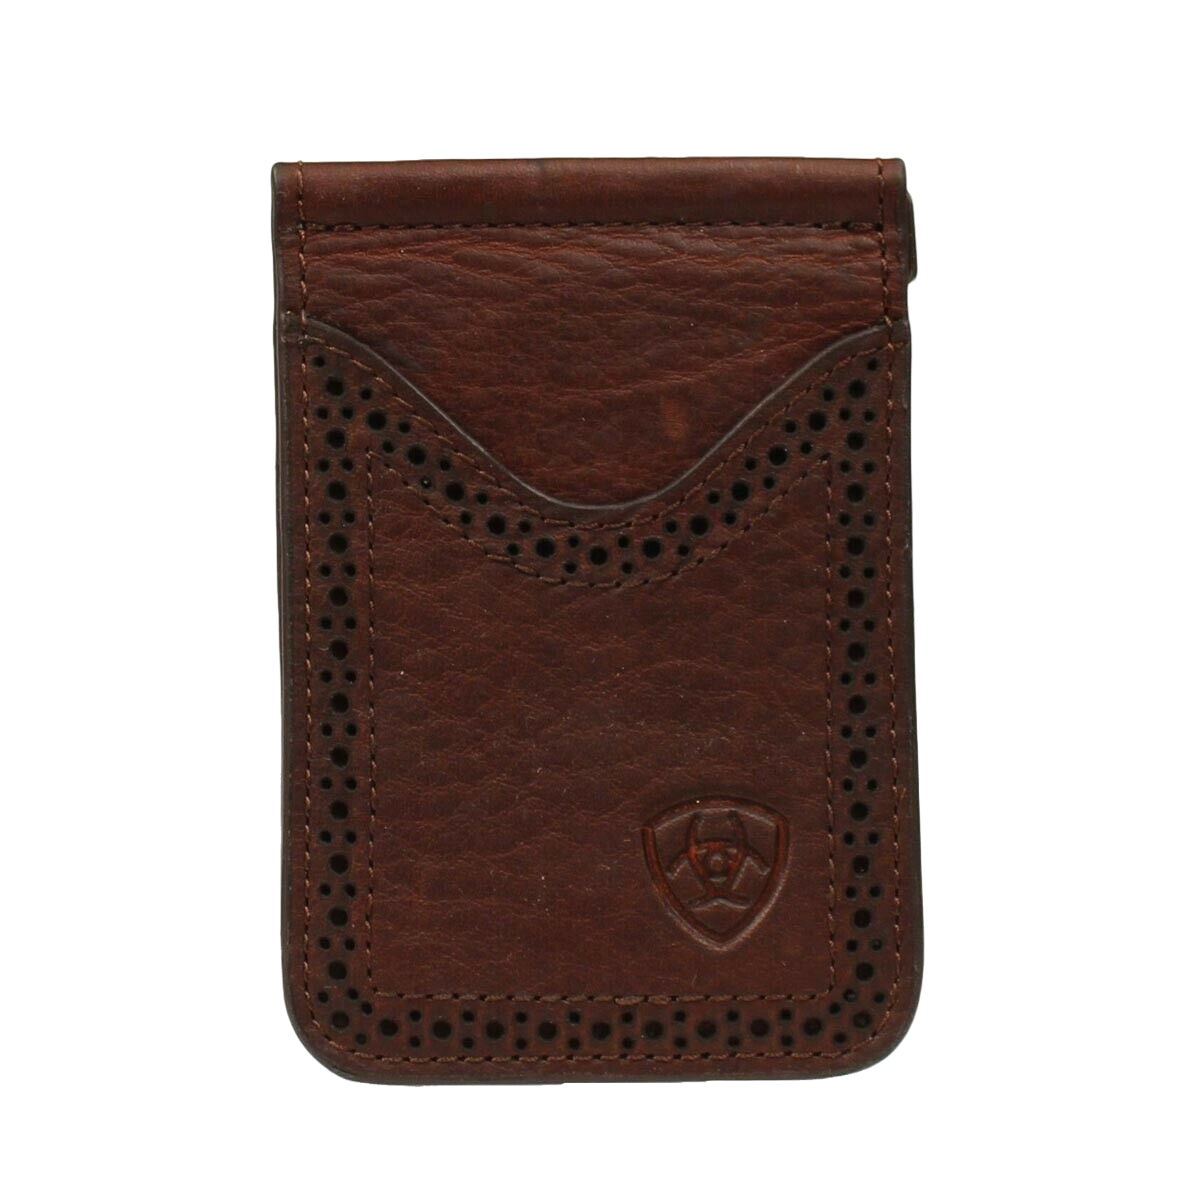 Ariat Dark Copper Leather Perforated Edges Card Case Money Clip  A35130283